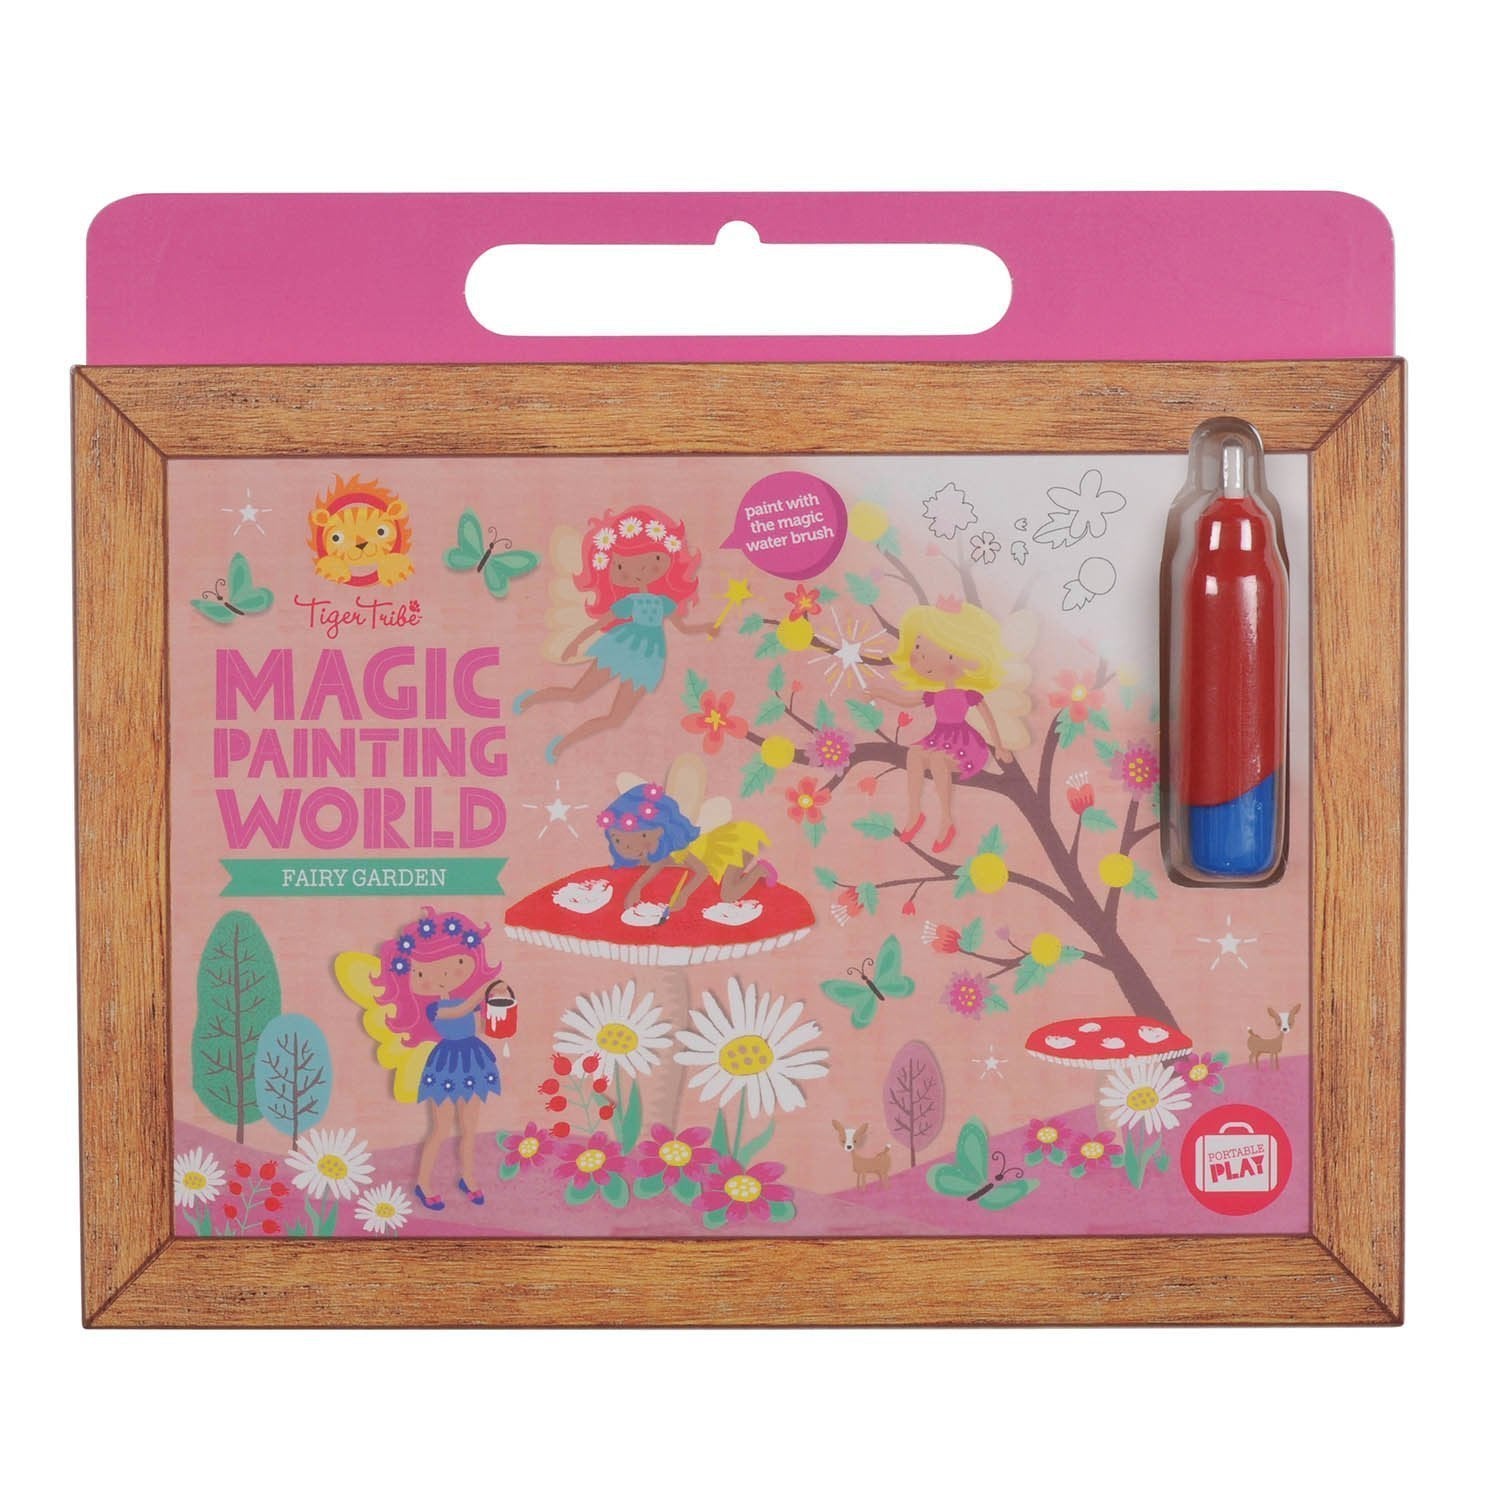 Magic Painting World - Fairy Garden - Tiger Tribe - Hugs For Kids